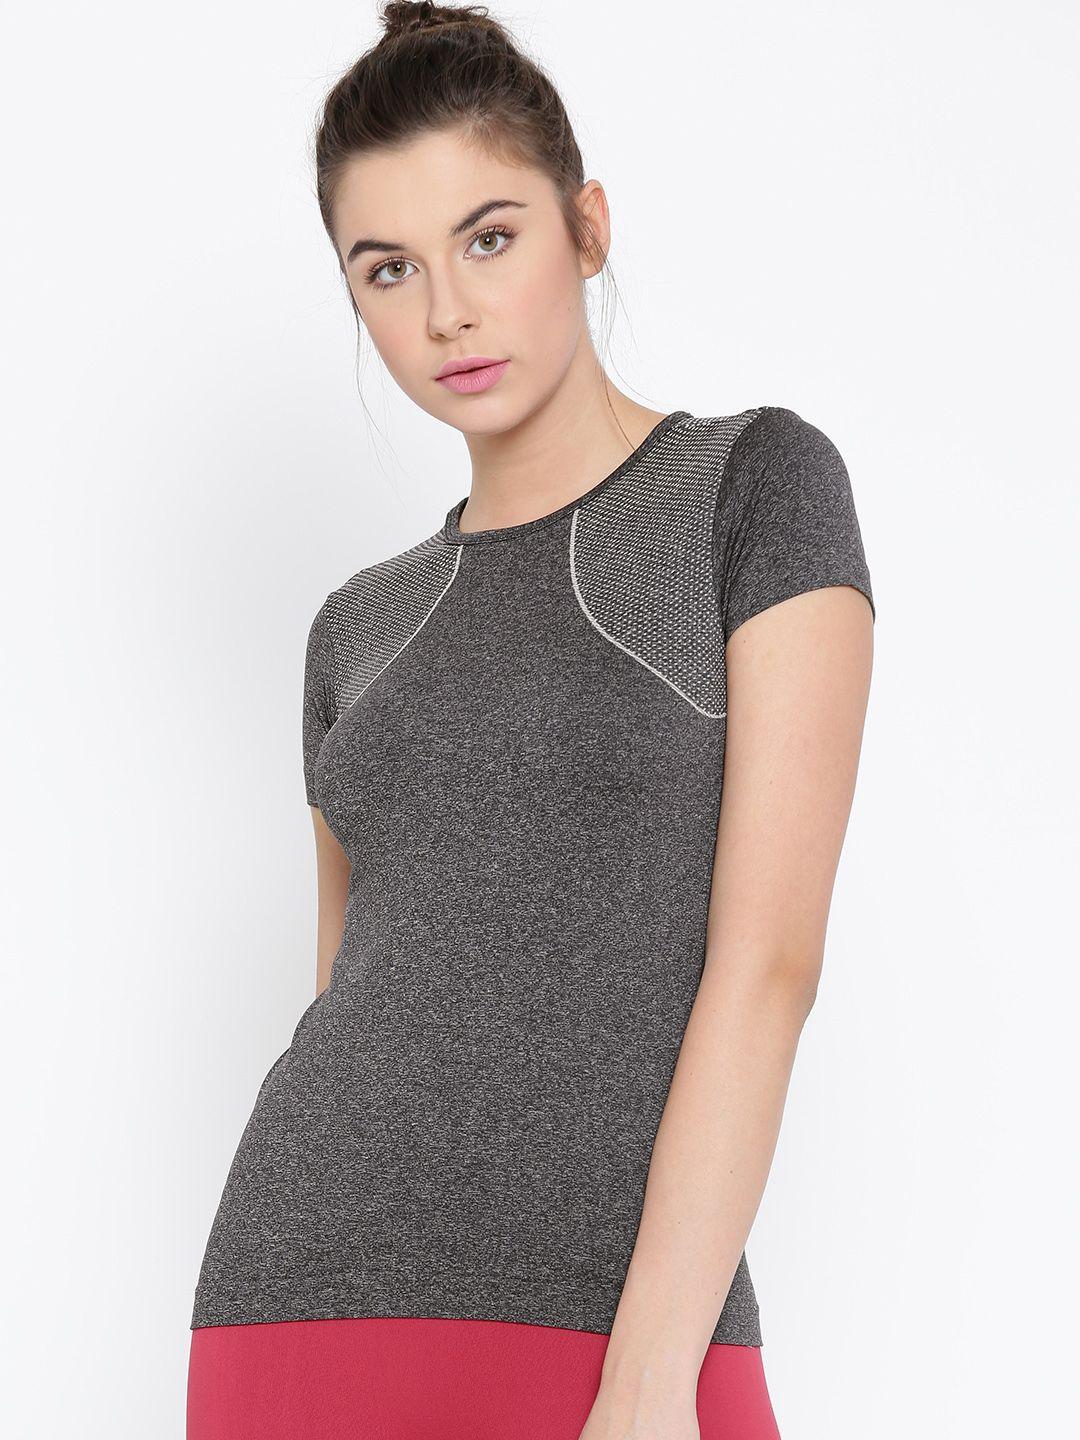 amante-women-charcoal-grey-solid-round-neck-t-shirt